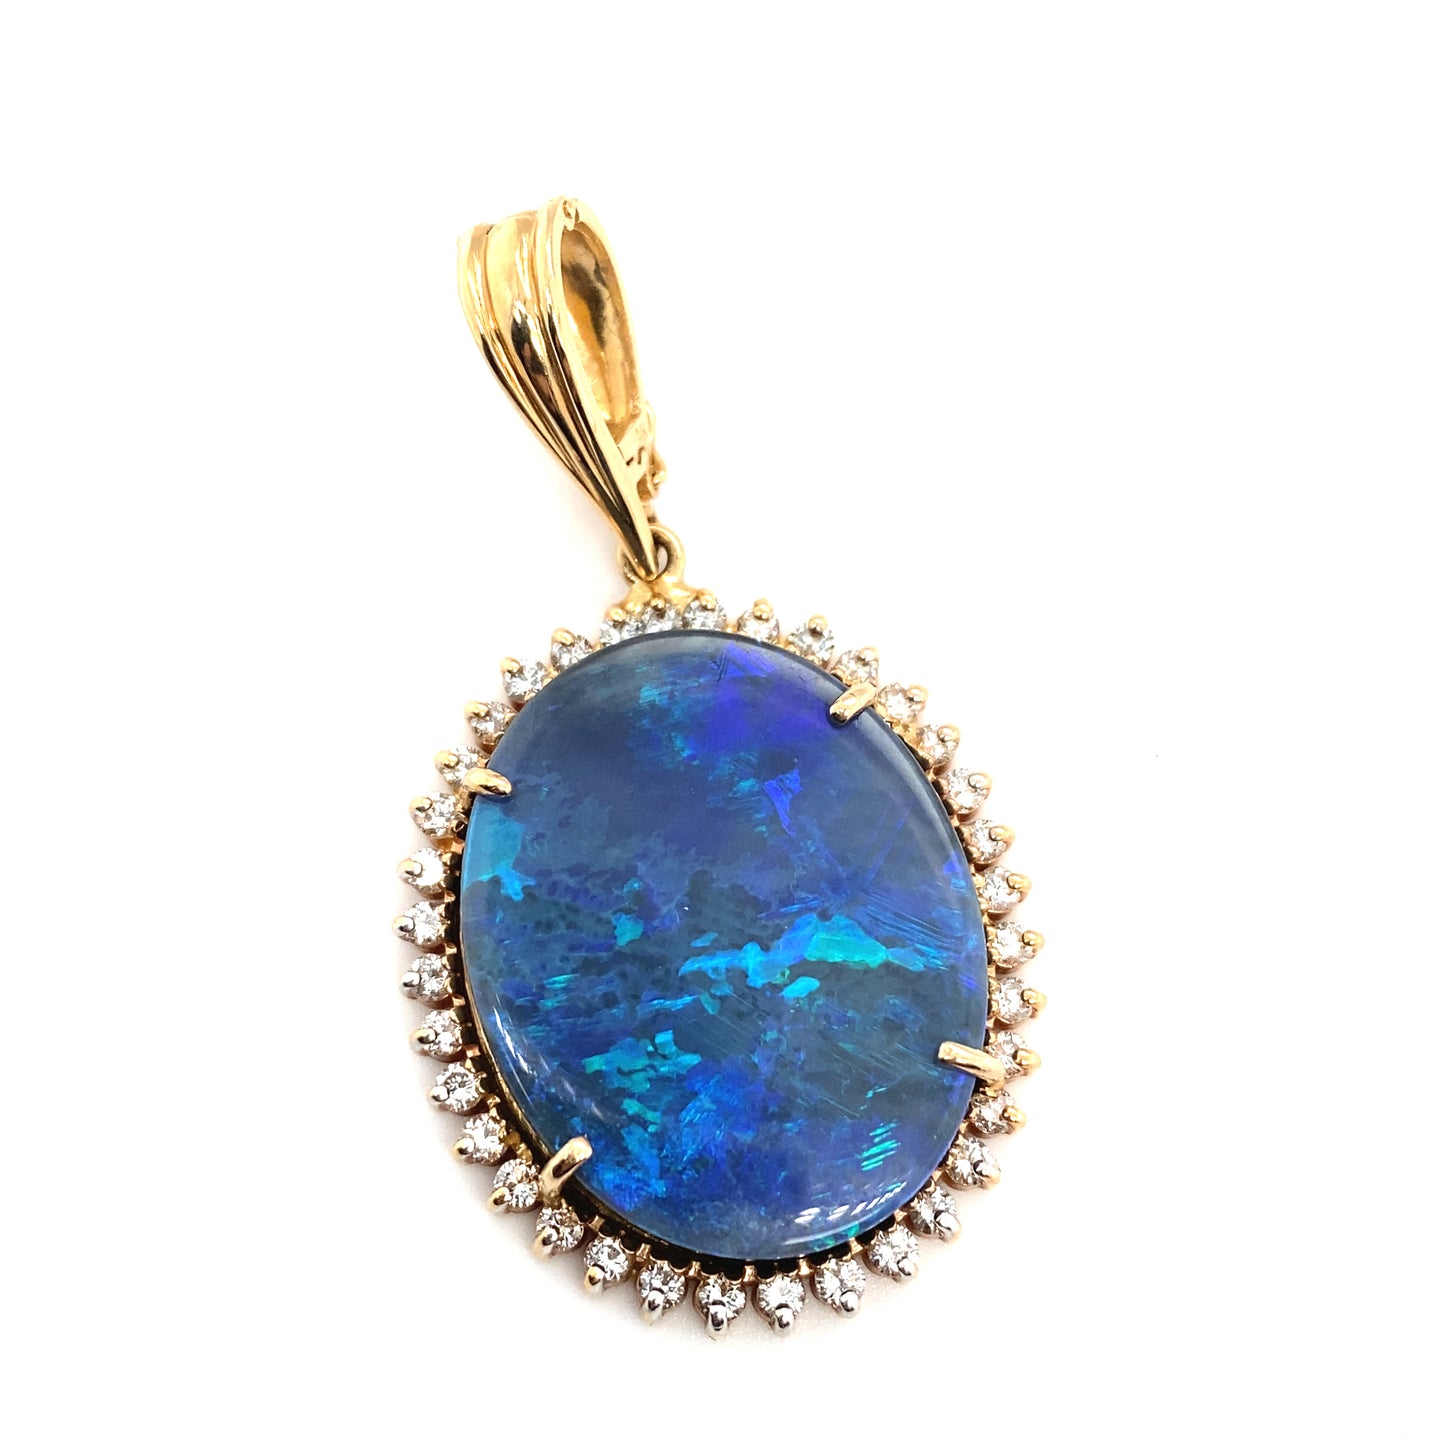 Circa 2000s Oval Opal Doublet Pendant with Diamonds in 14K Gold